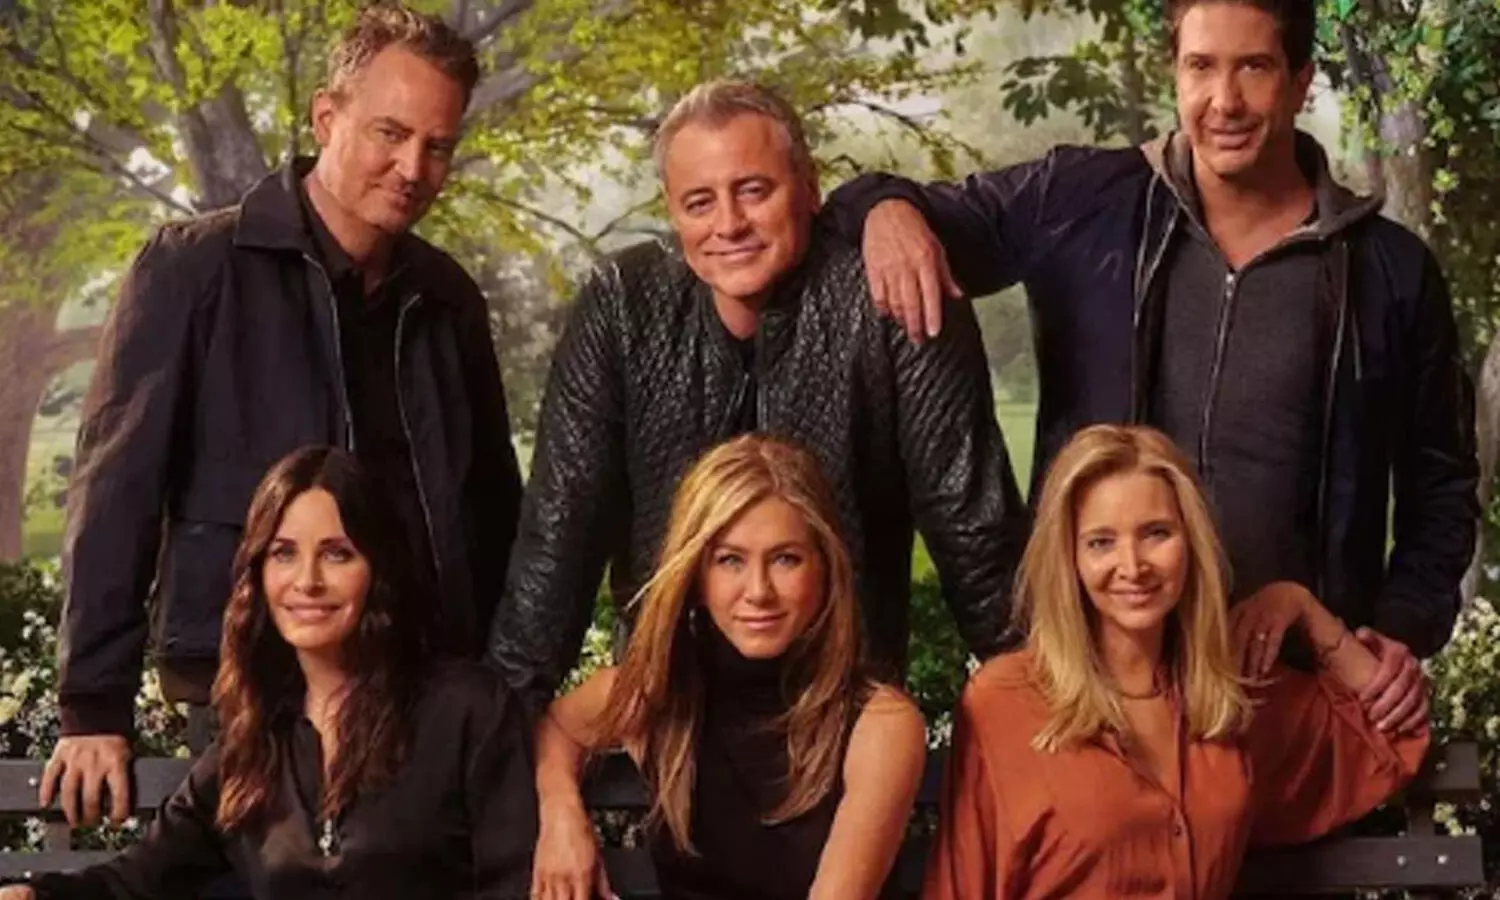 F.R.I.E.N.D.S Reunion trailer released; Here is a trip to old days!